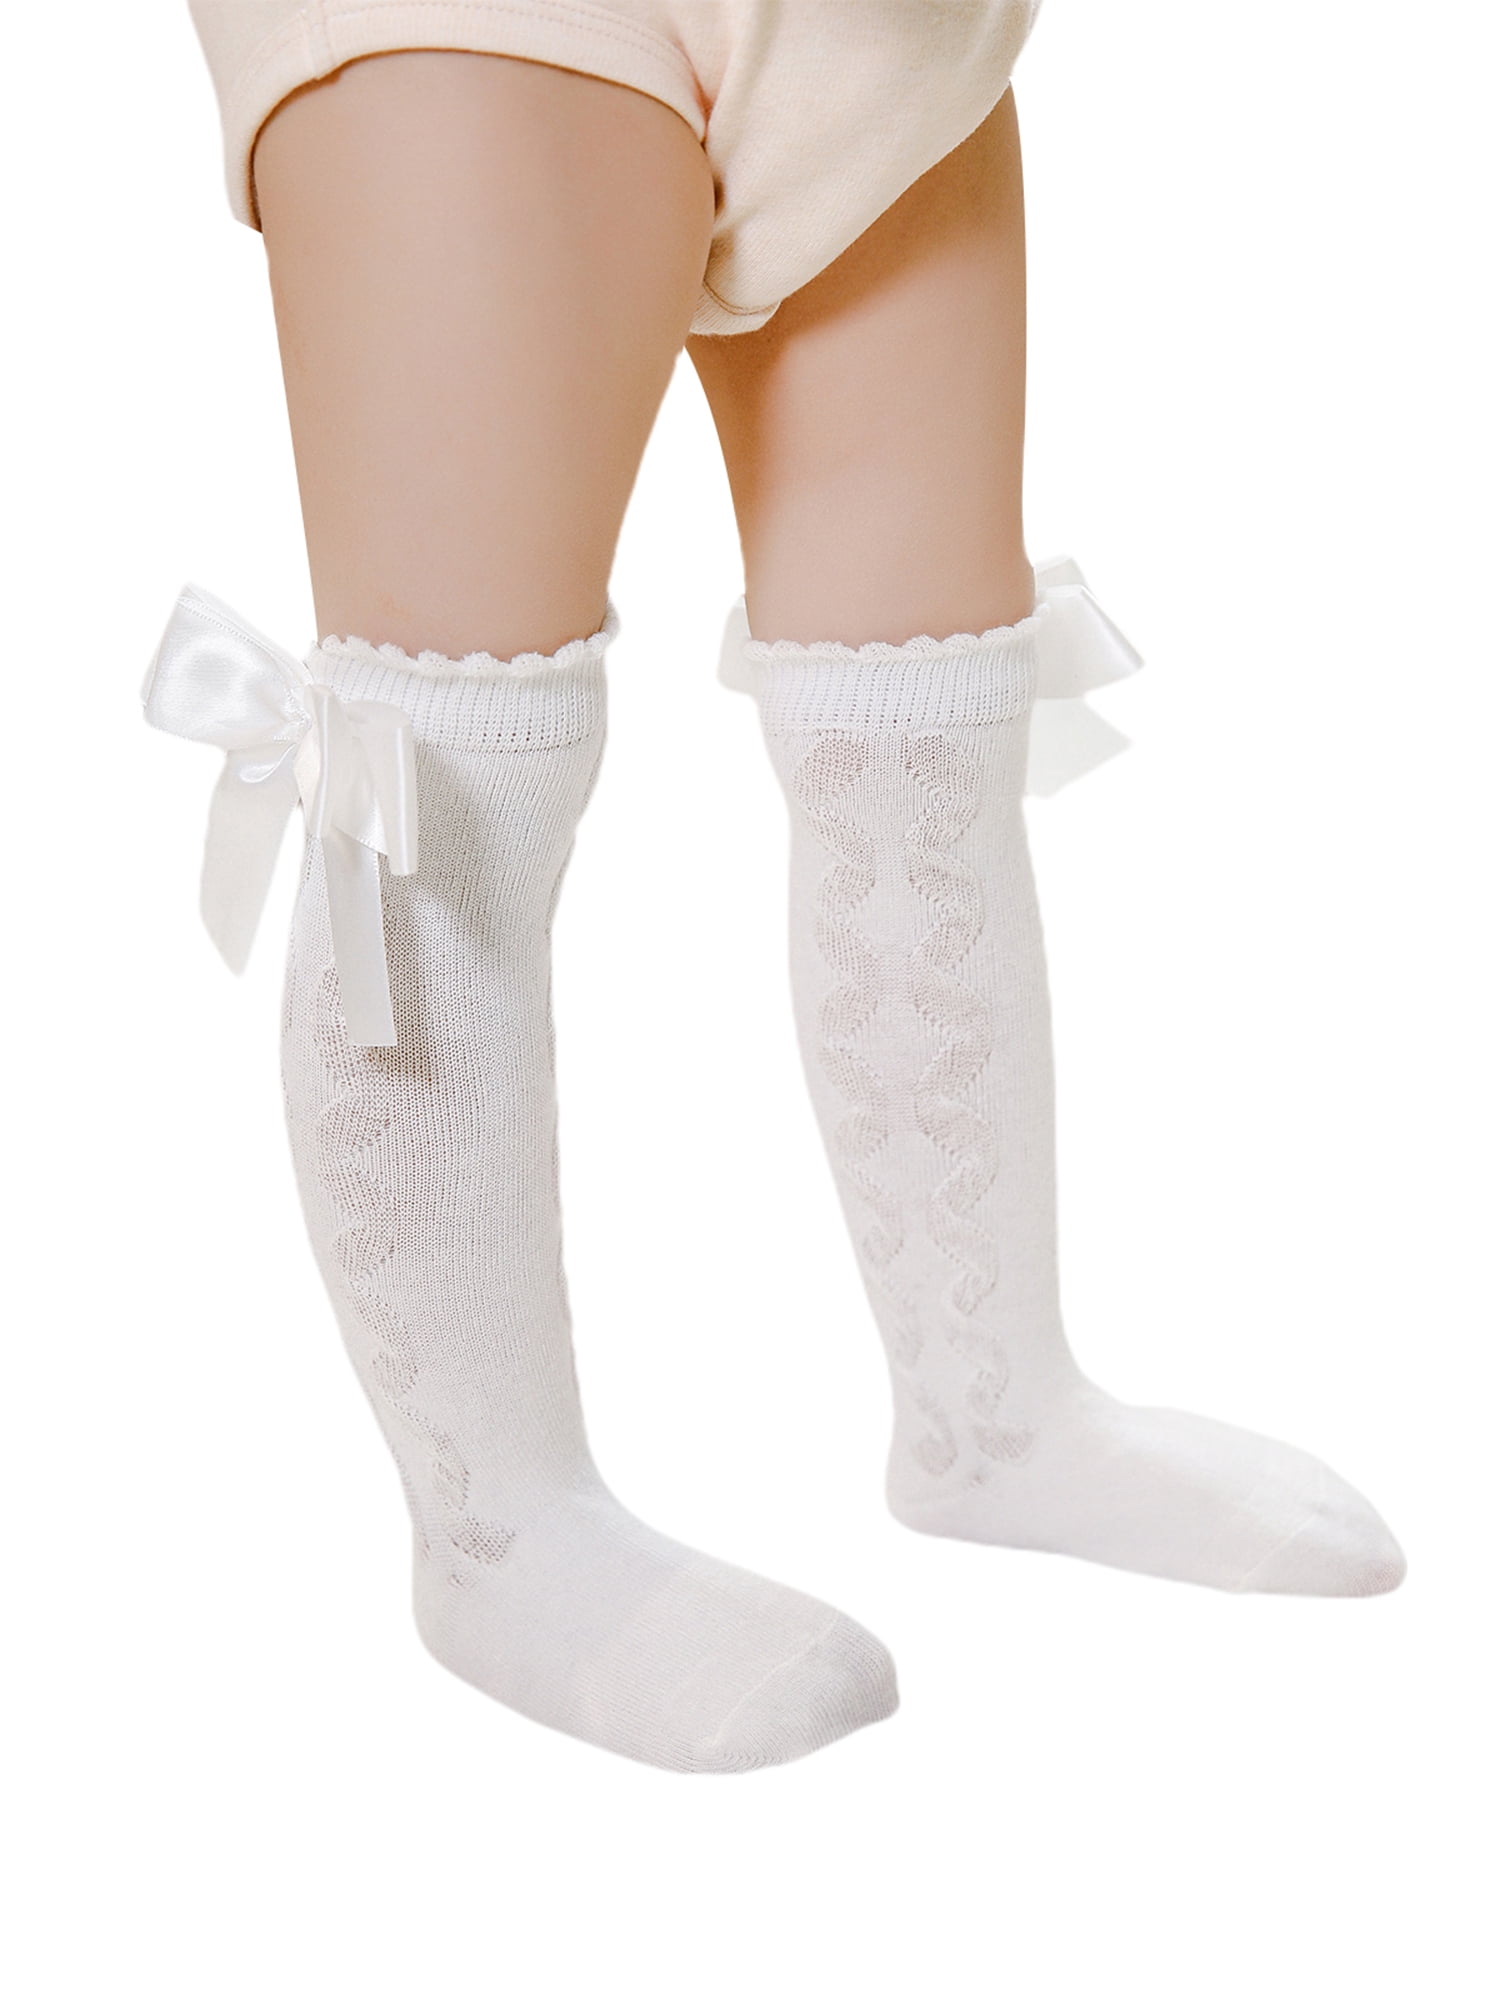 6 Pairs Little Girls Cable Knit Cotton Stockings Toddler Knee High Socks